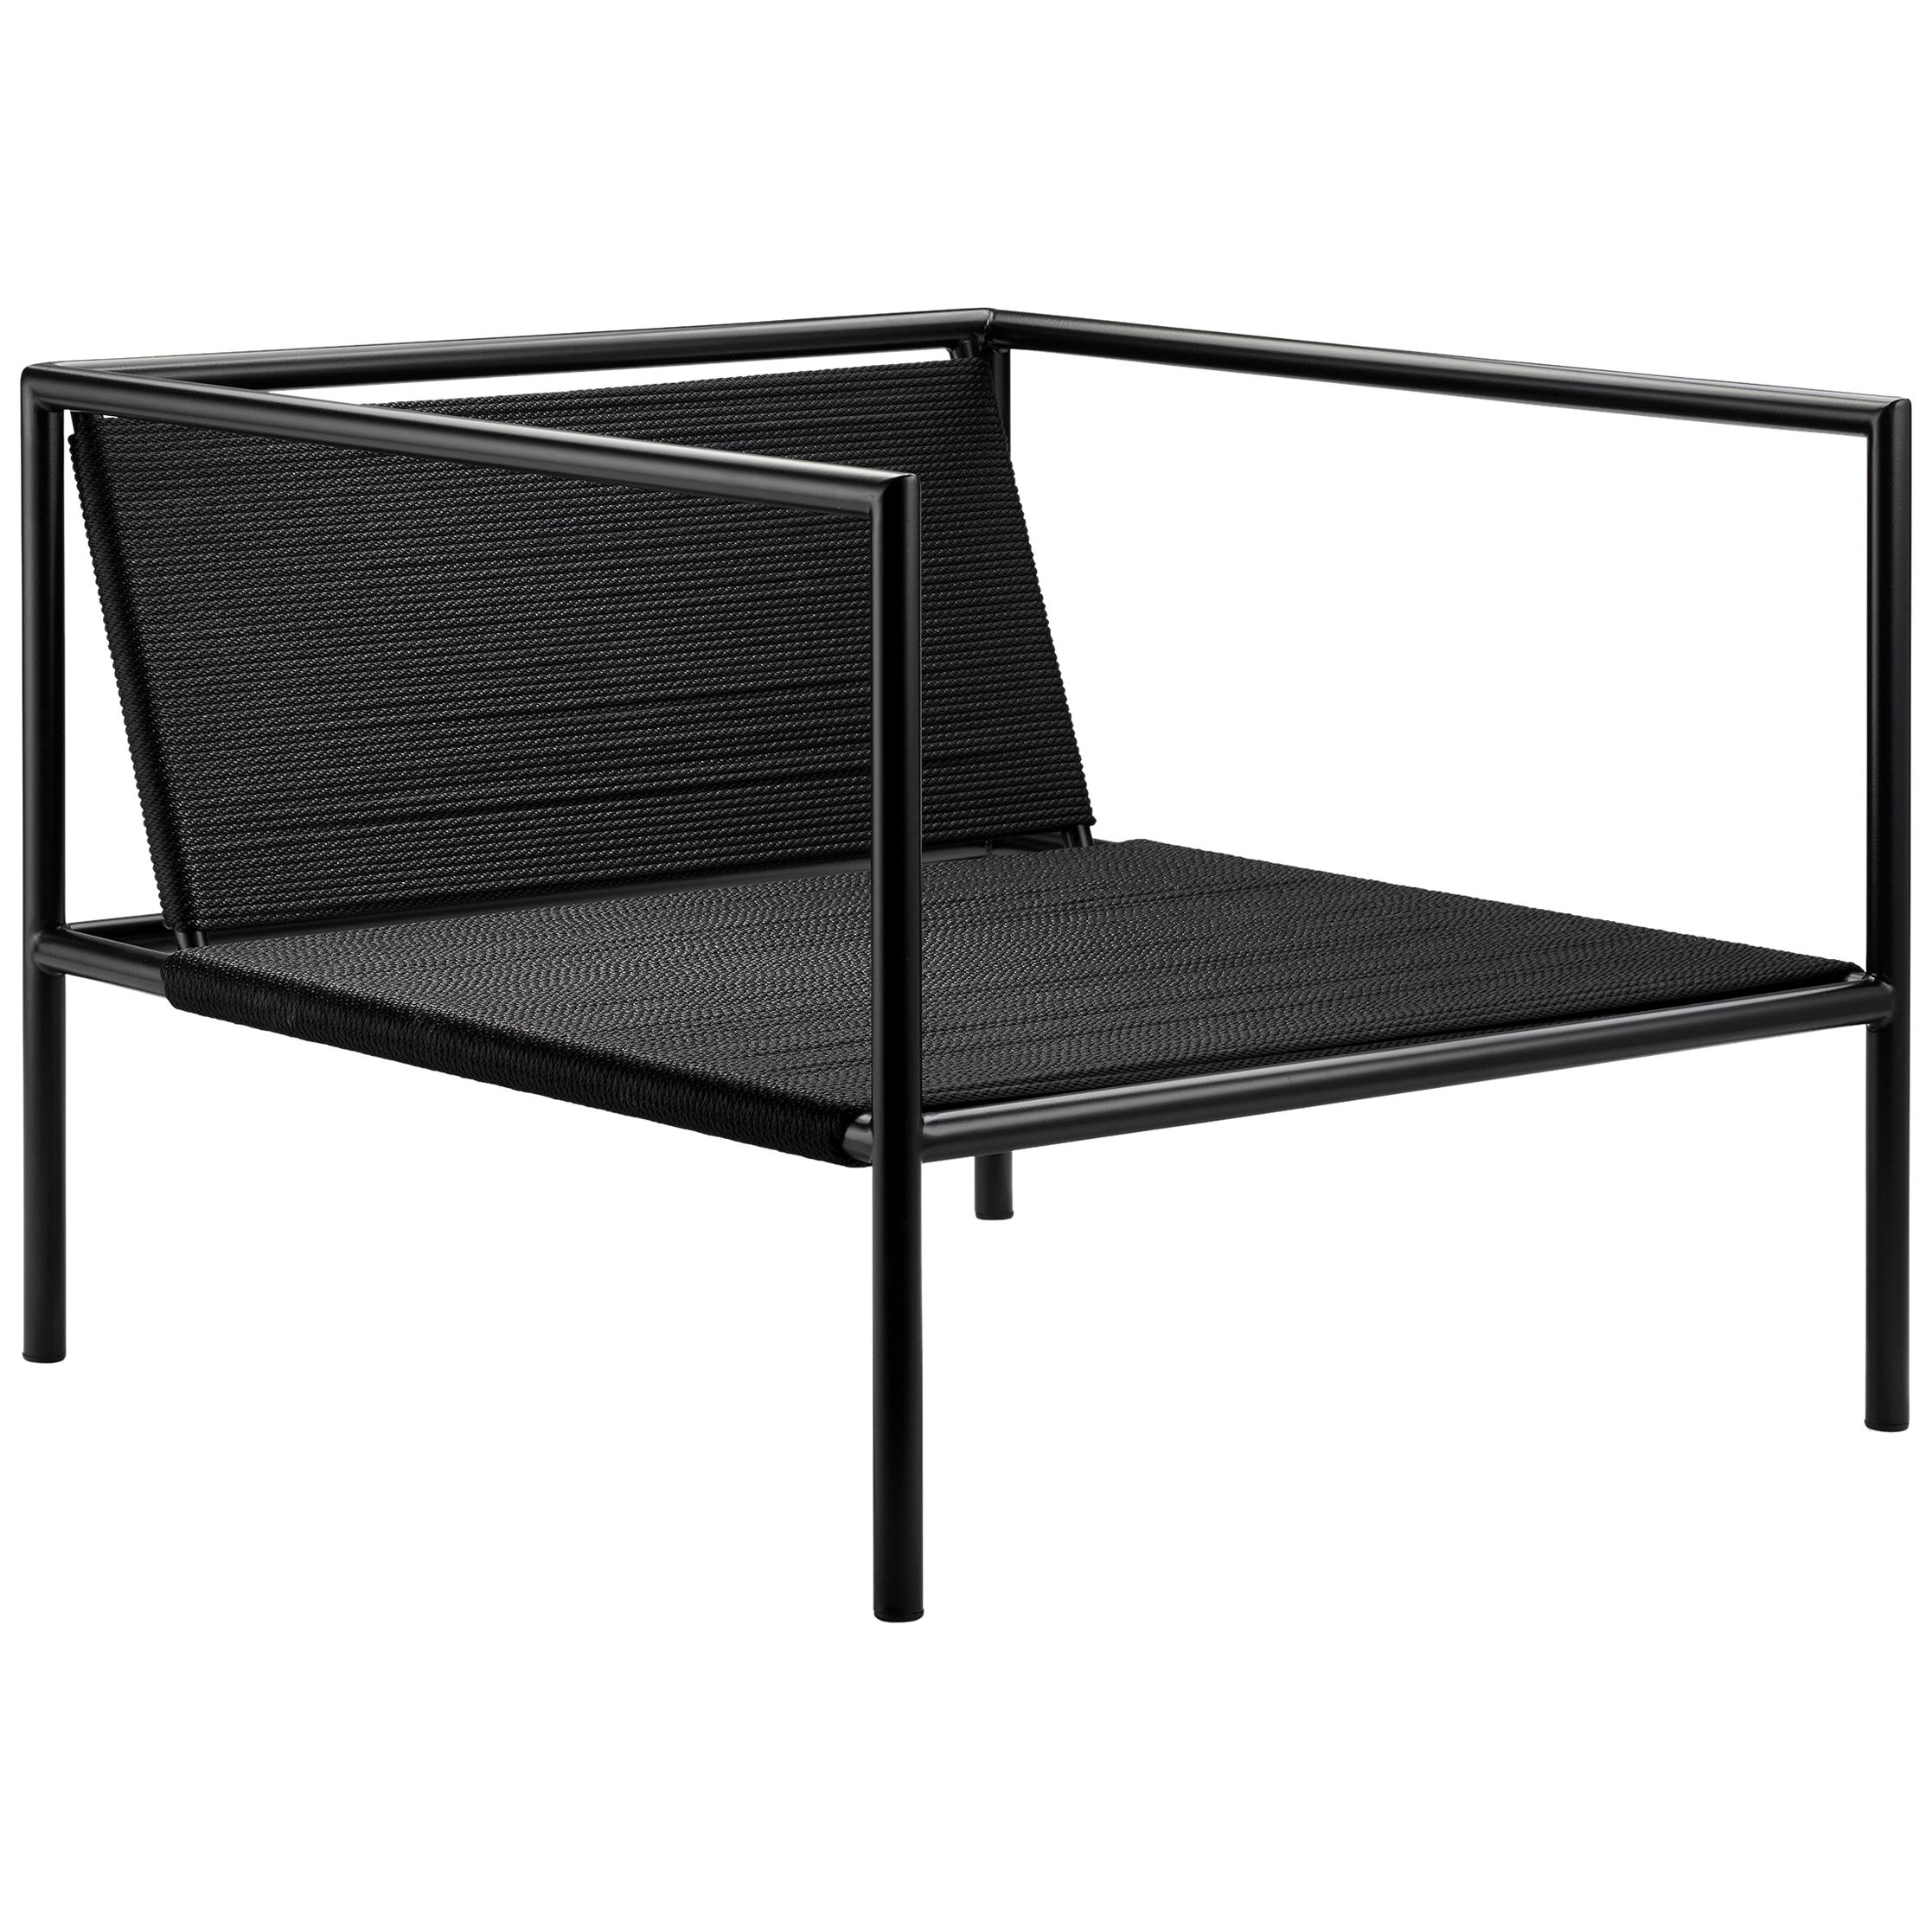 Outdoor Armchair Powder Coated Black Stainless Steel and Nylon Cord